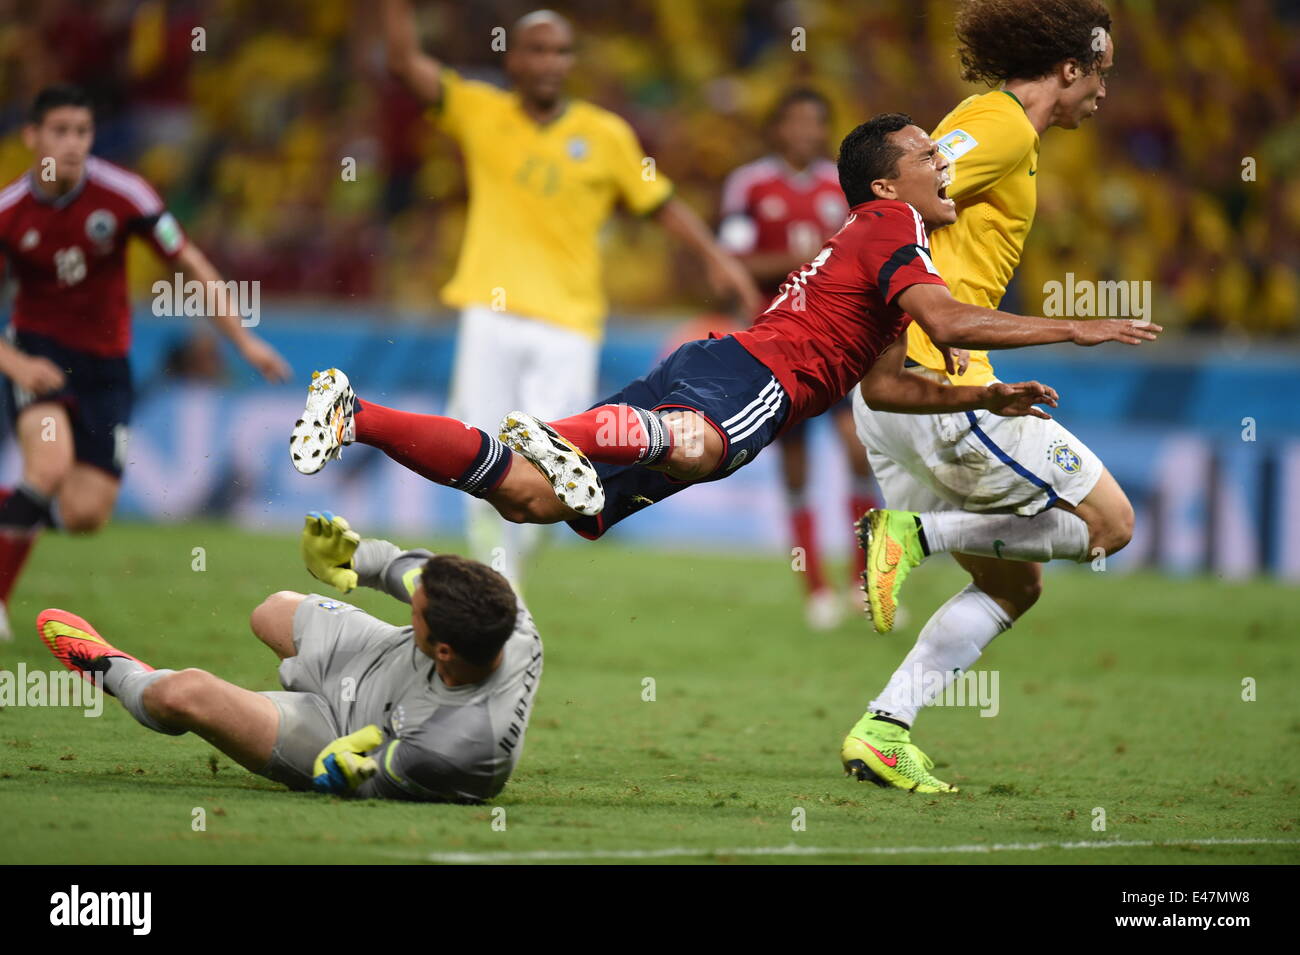 Fortaleza, Brazil. 04th July, 2014. Goalkeeper Julio Cesar (L) of Brazil and Carlos Bacca (C) of Colombia vie for the ball during the FIFA World Cup 2014 quarter final match soccer between Brazil and Colombia at the Estadio Castelao in Fortaleza, Brazil, 04 July 2014. Photo: Marius Becker/dpa/Alamy Live News Stock Photo